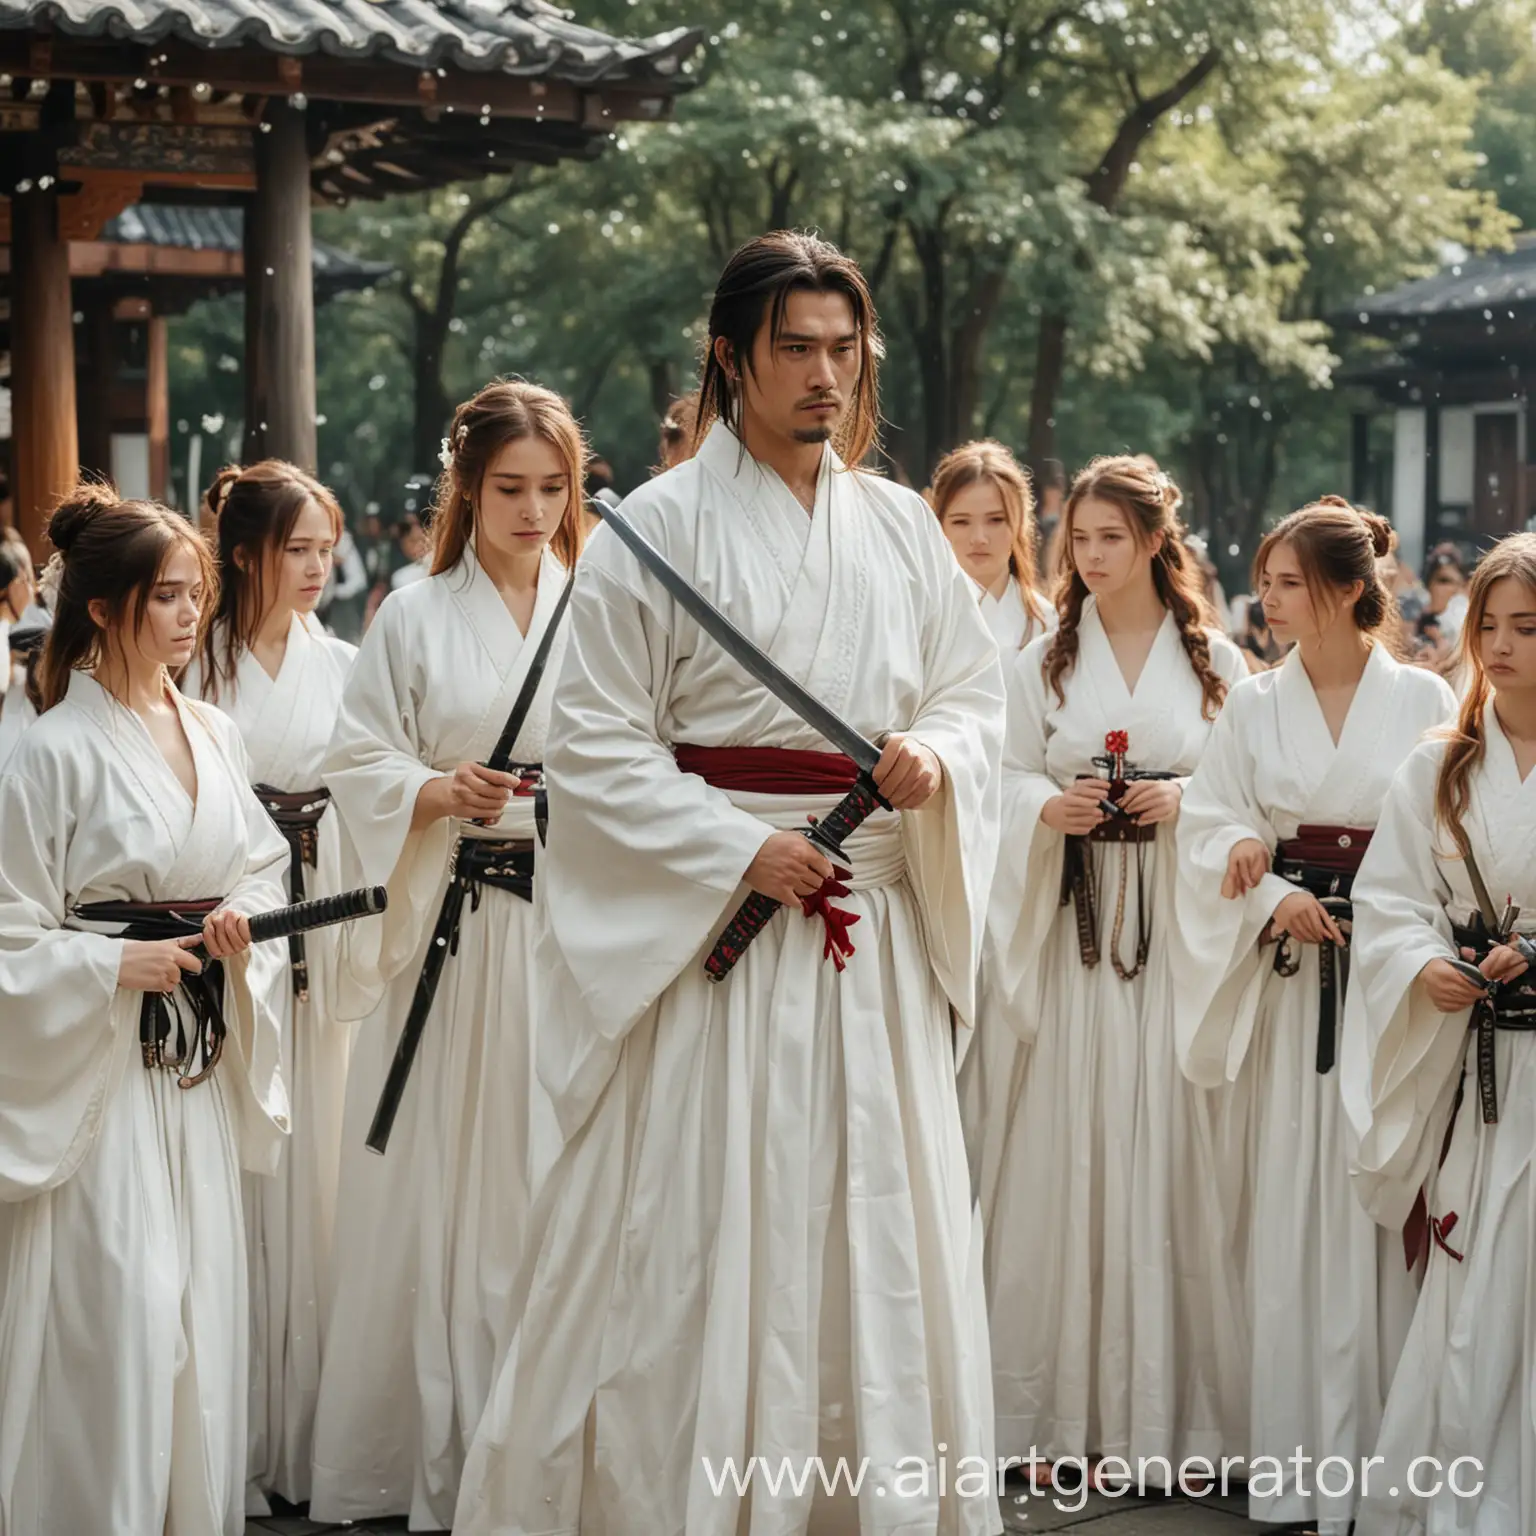 Many girls in white wedding dresses with samurai swords in their hands protect a man.